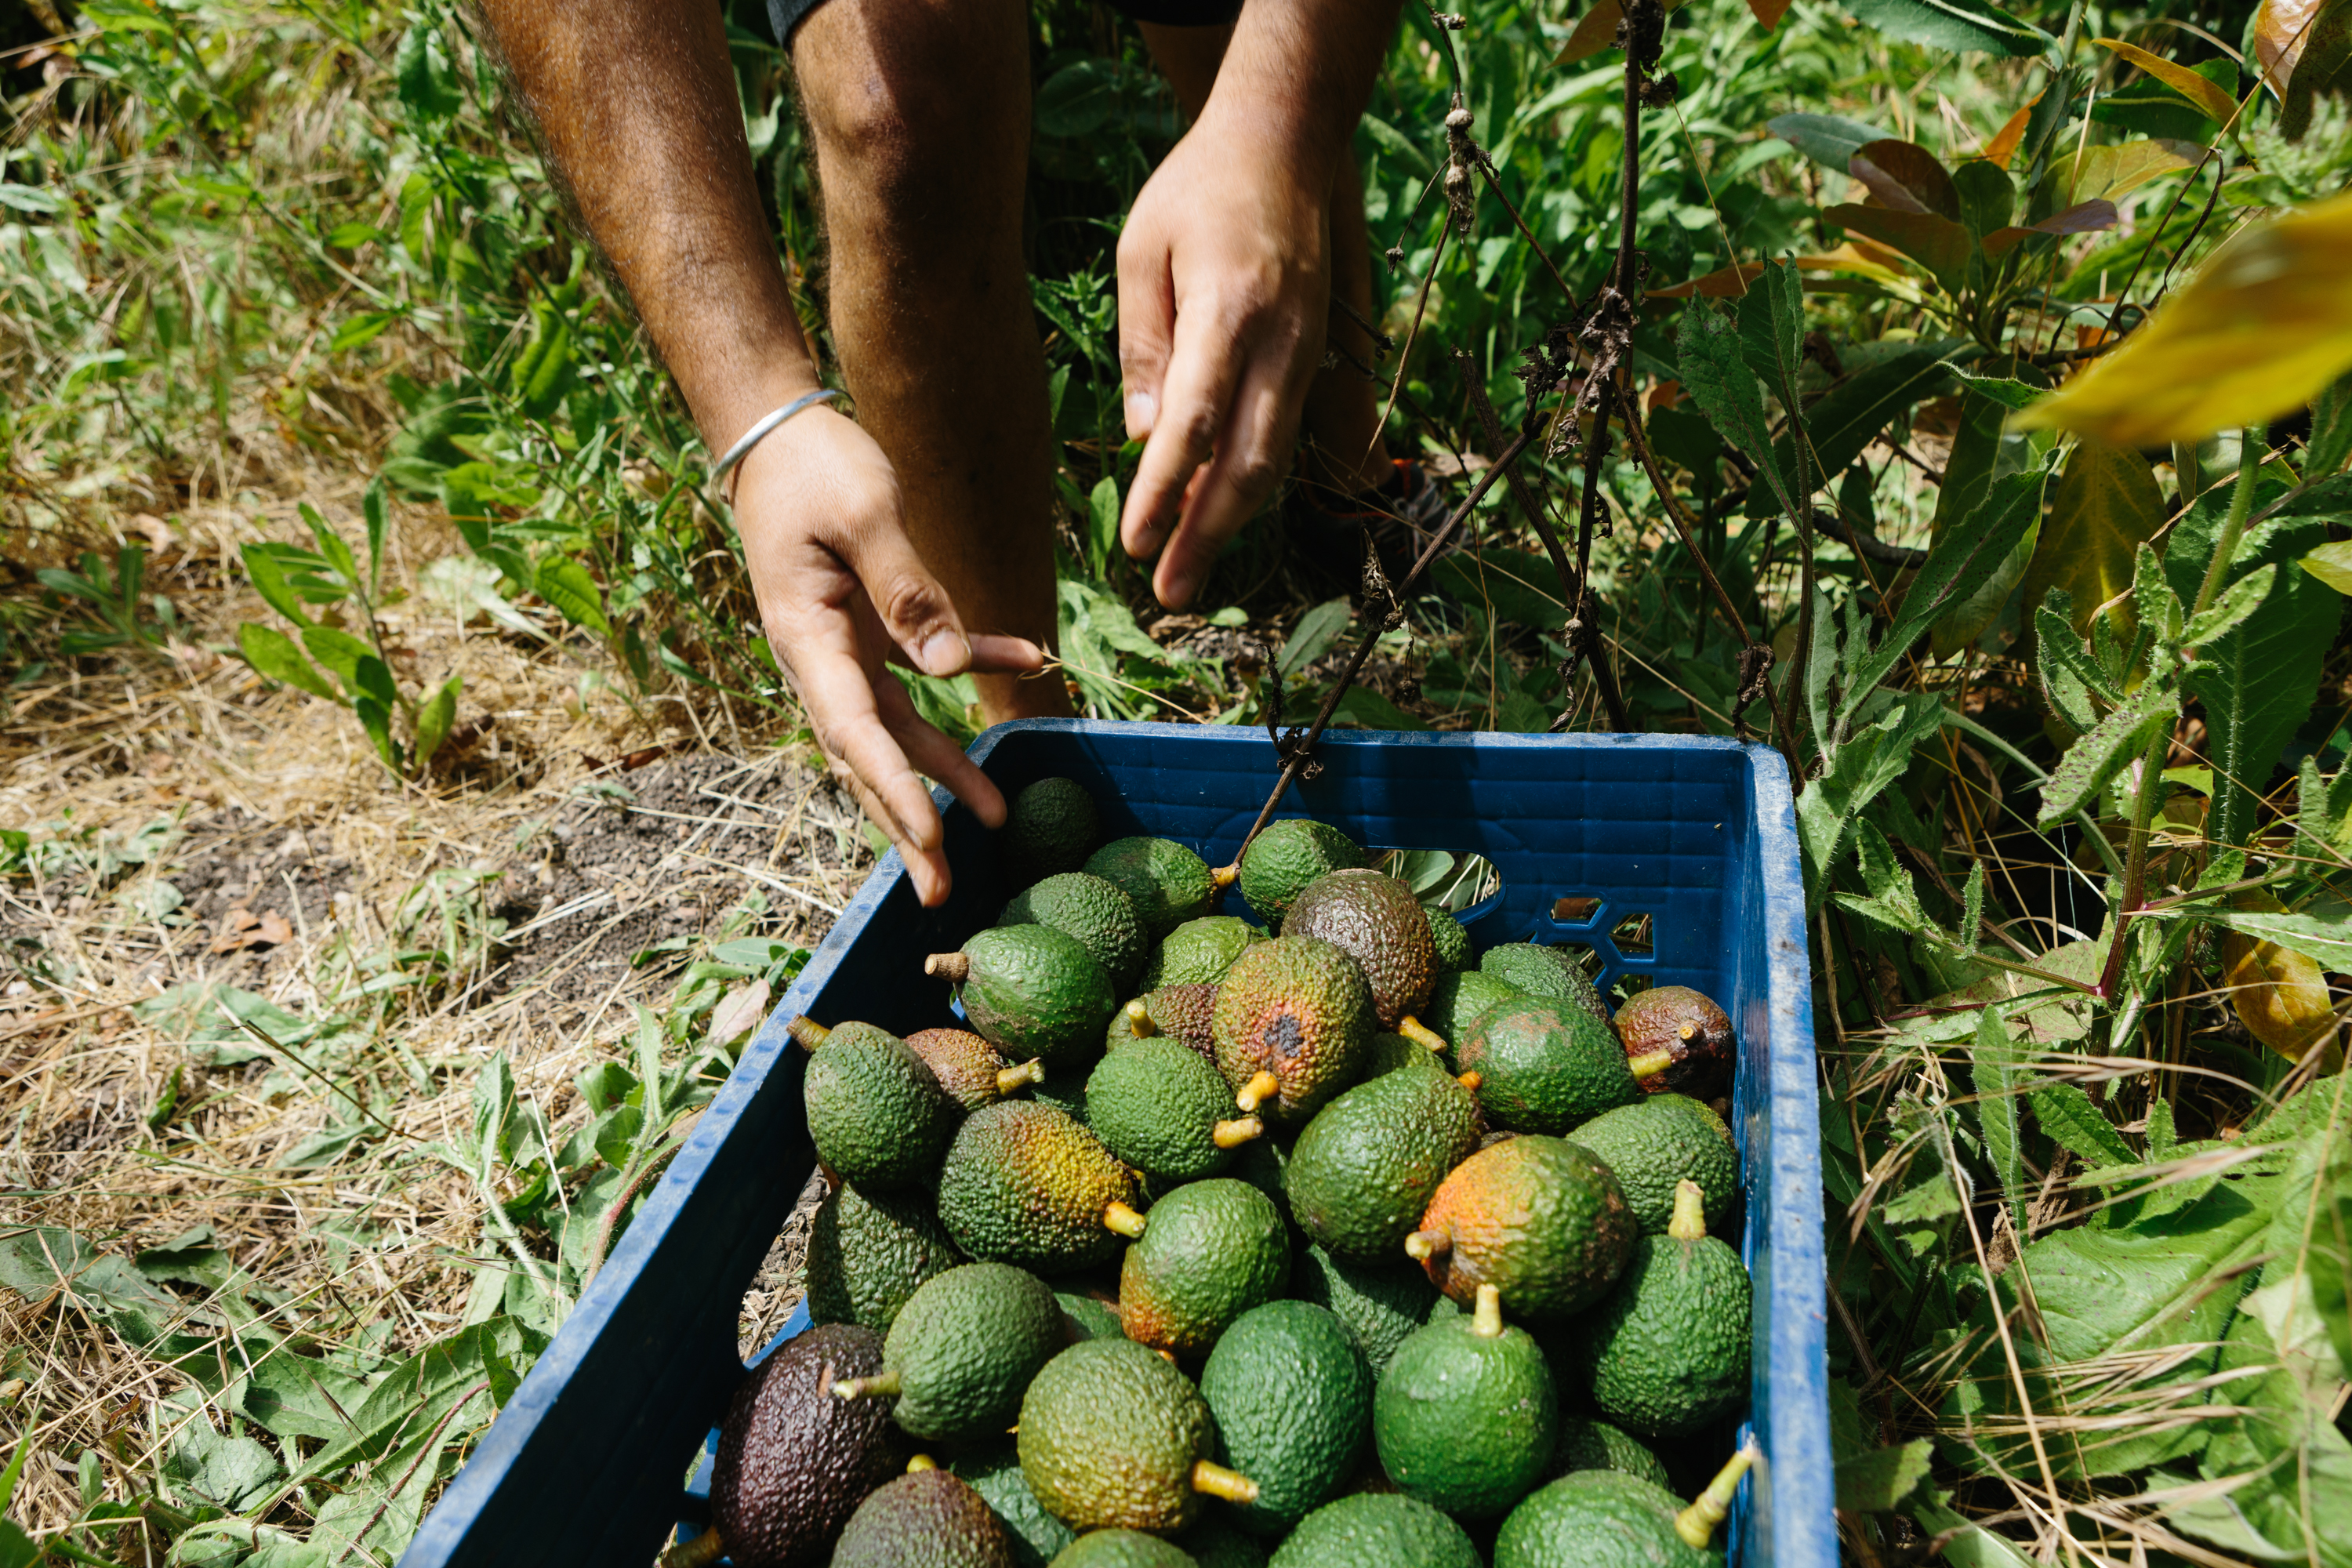 A farmer fills a crate with avocados while picking them in California. (Getty Images/iStockphoto&mdash;© Patrick Record 2020)